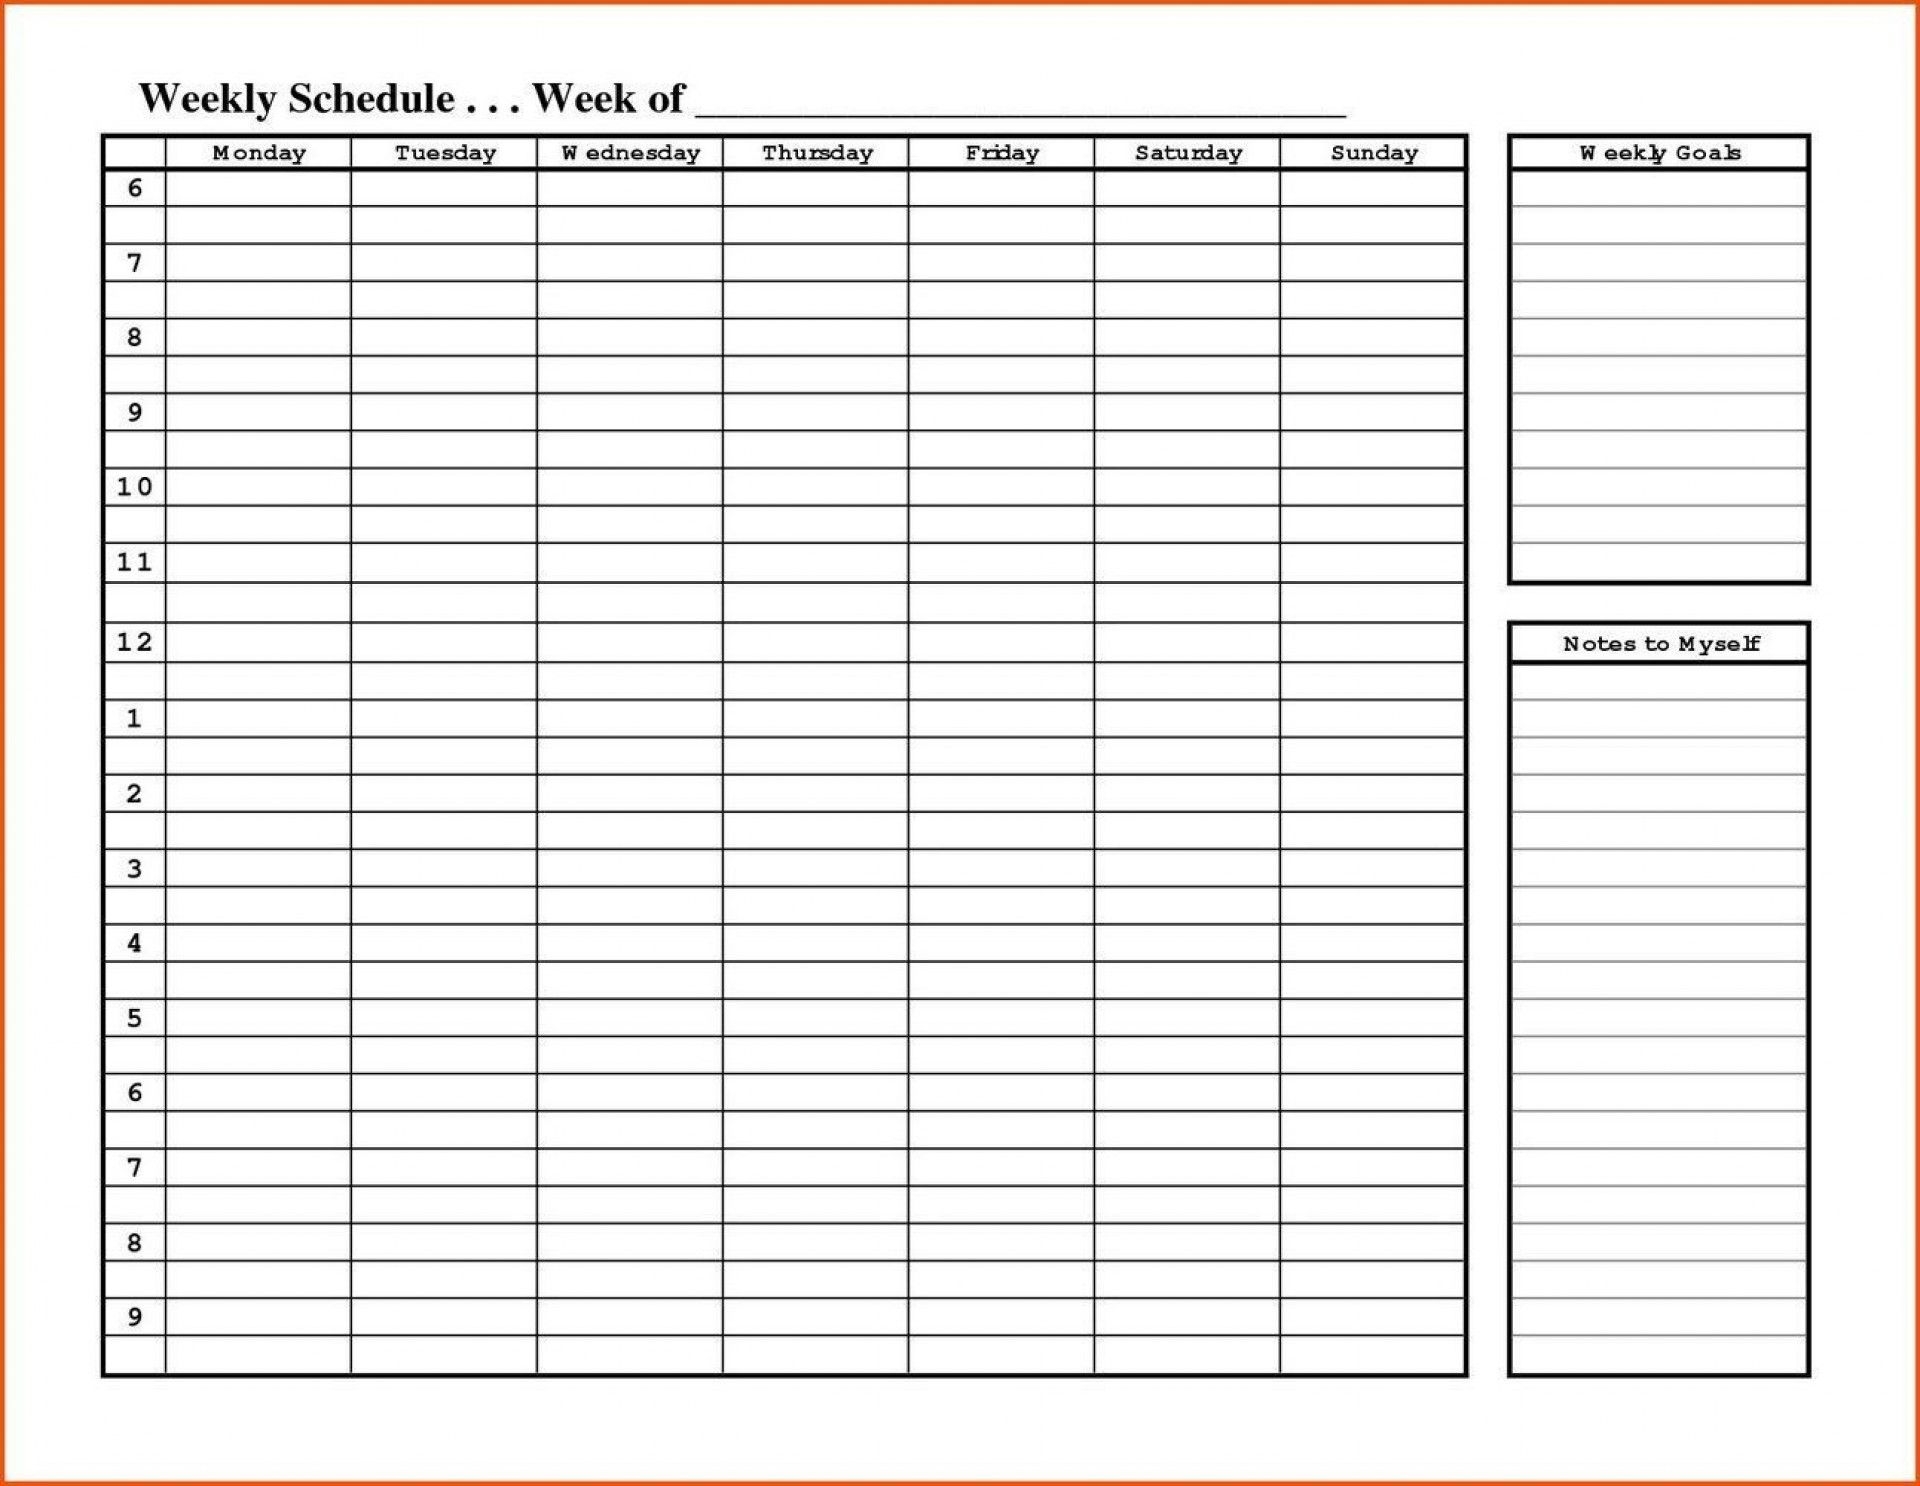 Monthly Employee Shift Schedule Template ~ Addictionary